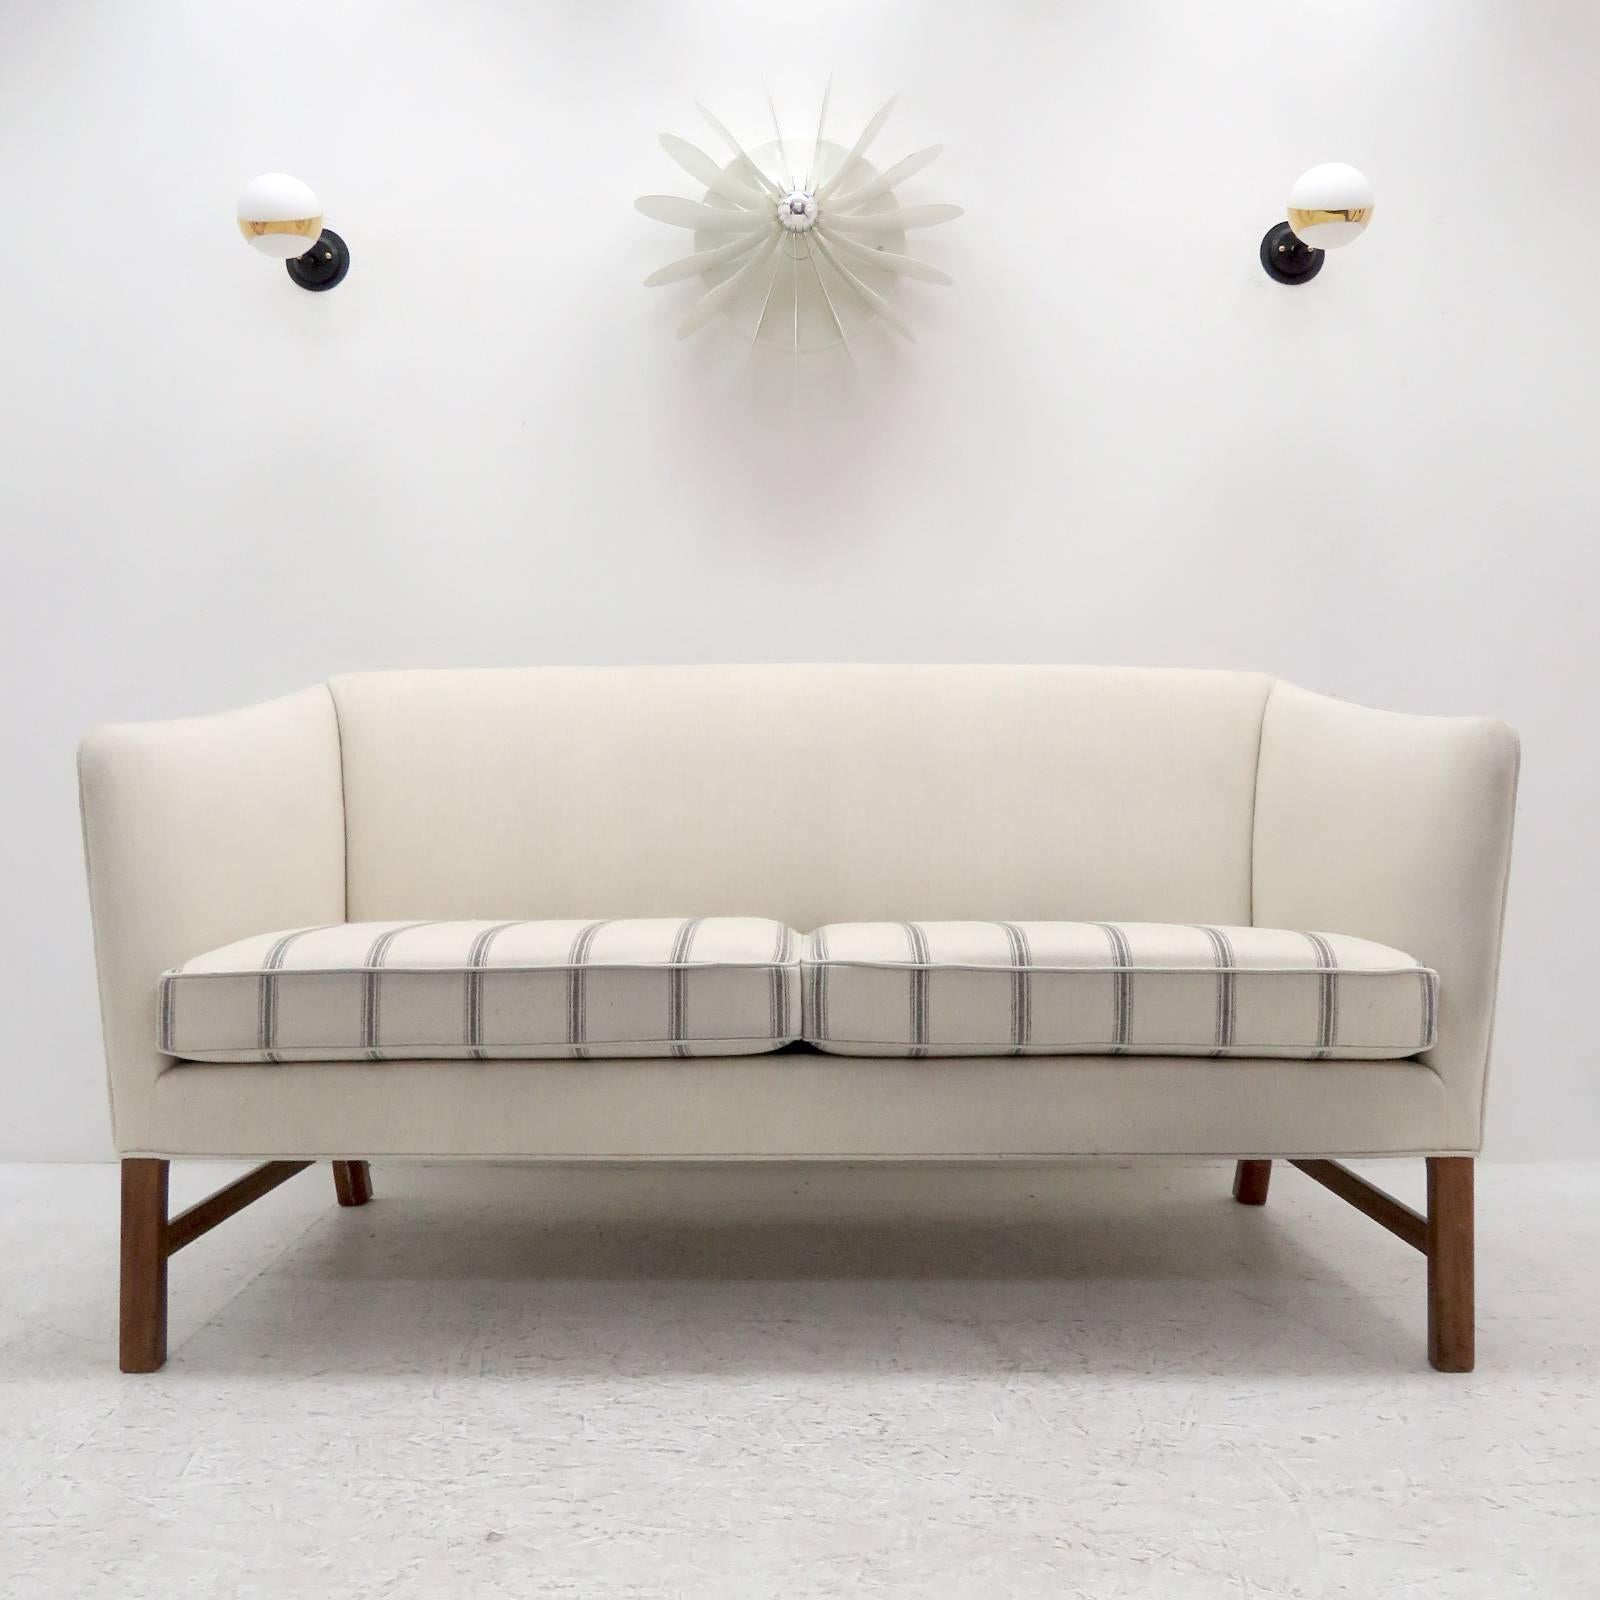 Wonderful settee designed by Ole Wanscher, produced by A.J. Iversen, Denmark in 1960 with eggshell colored wool fabric and lightly striped seat cushion on Cuban mahogany legs.